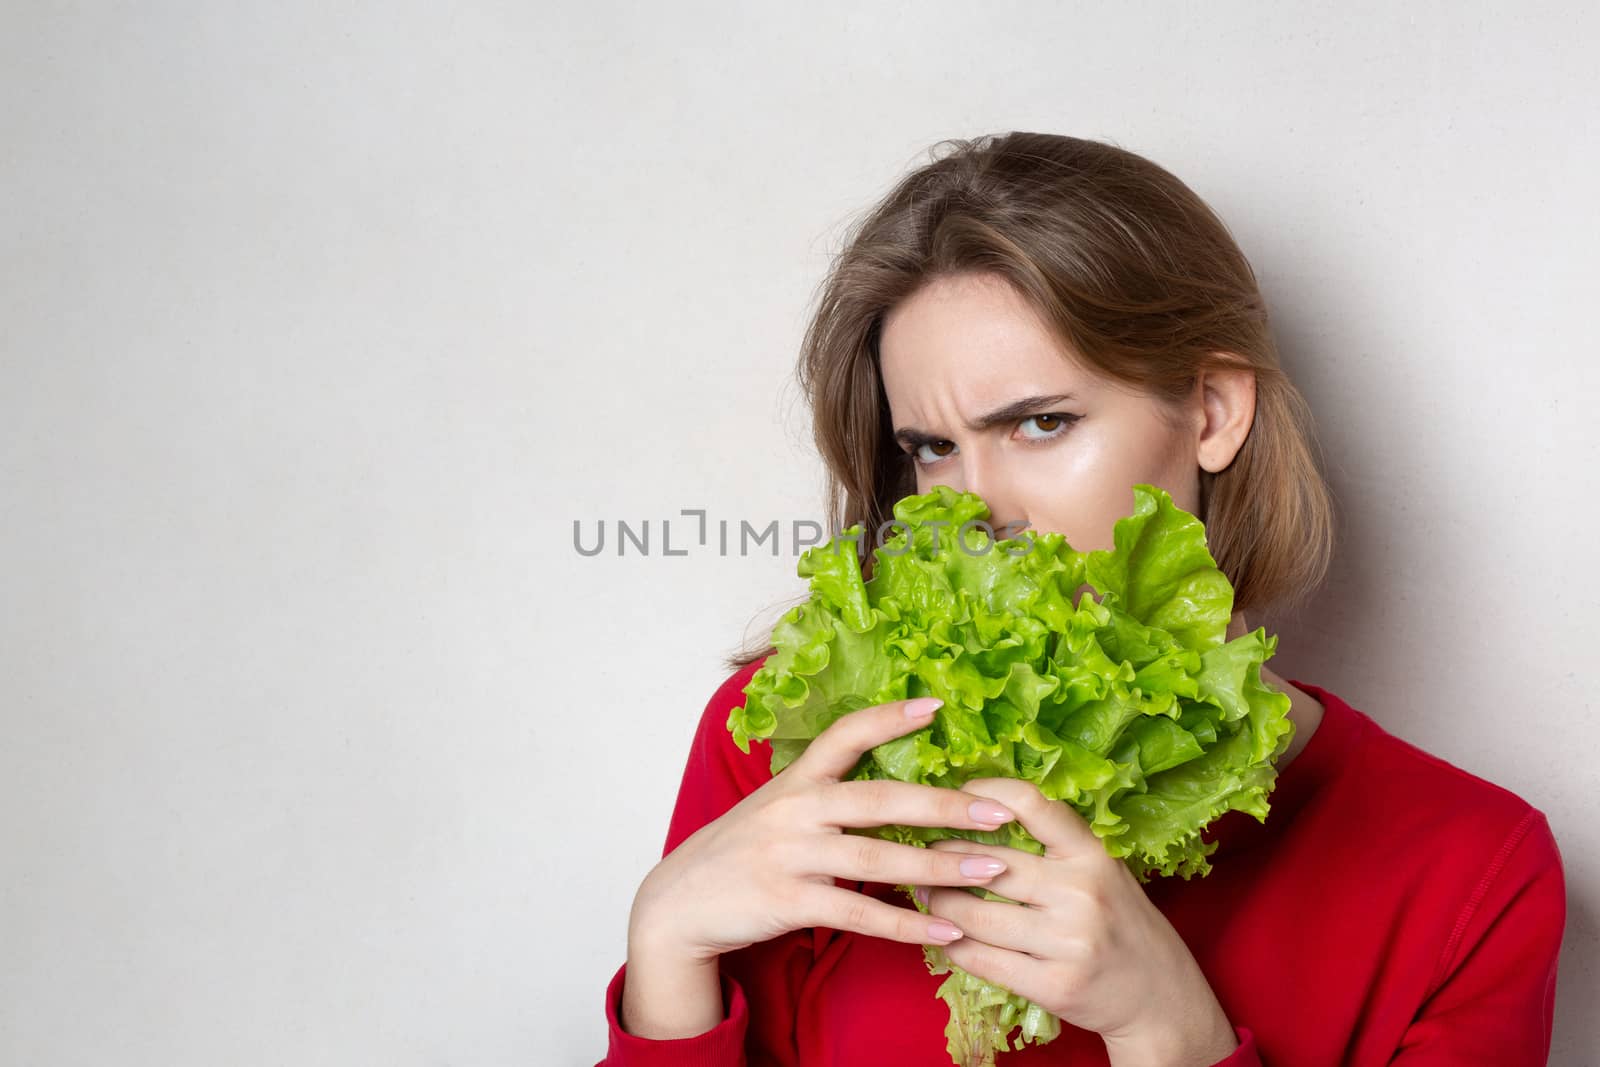 Suspecting brunette woman wears red sweater holding lettuce over a grey background. Empty space